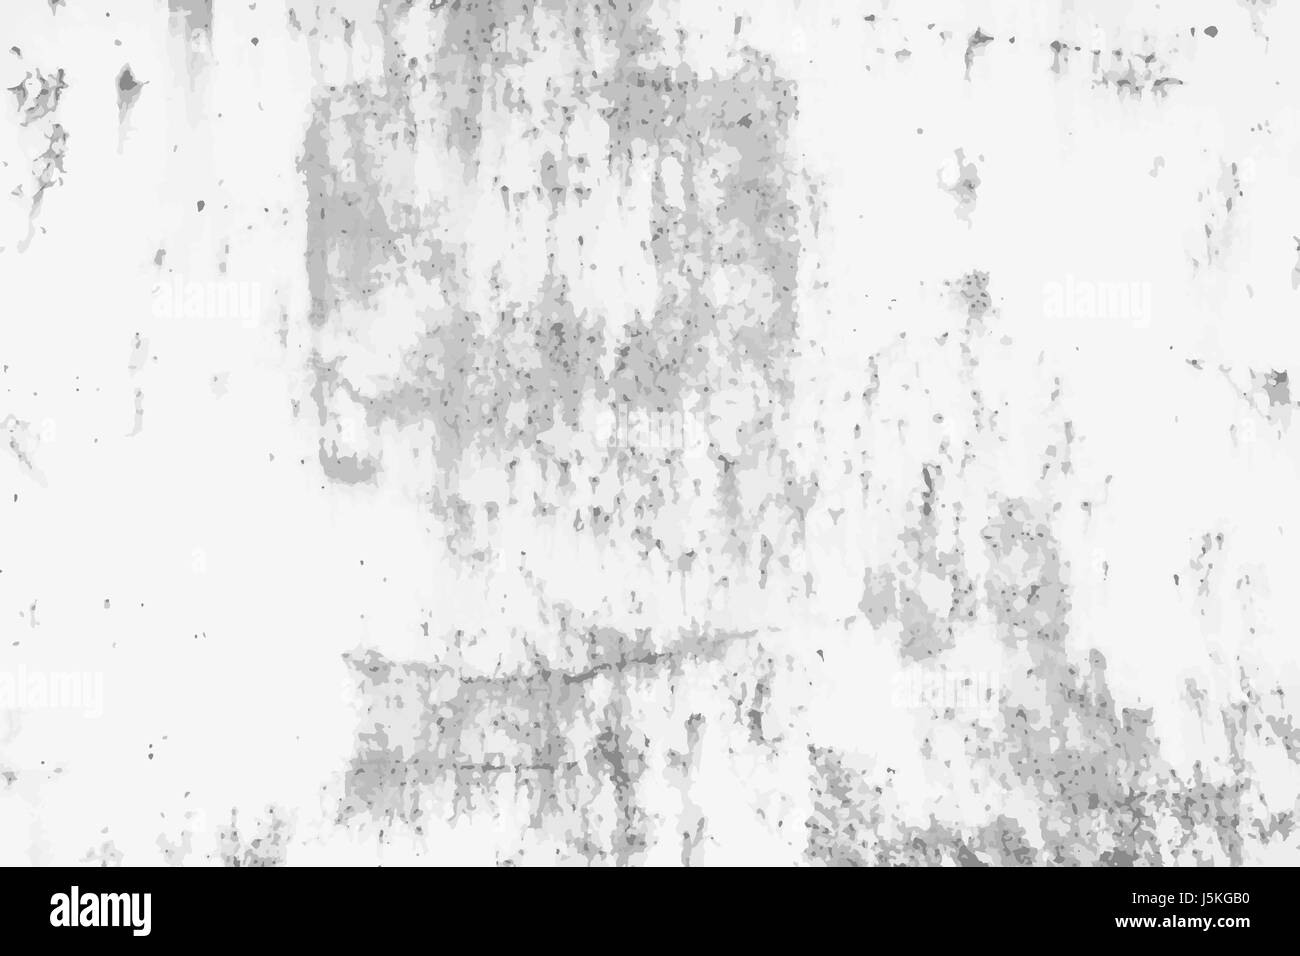 Rusted metal industrial distress background. Grunge black and white vector texture template for overlay artwork. Stock Vector